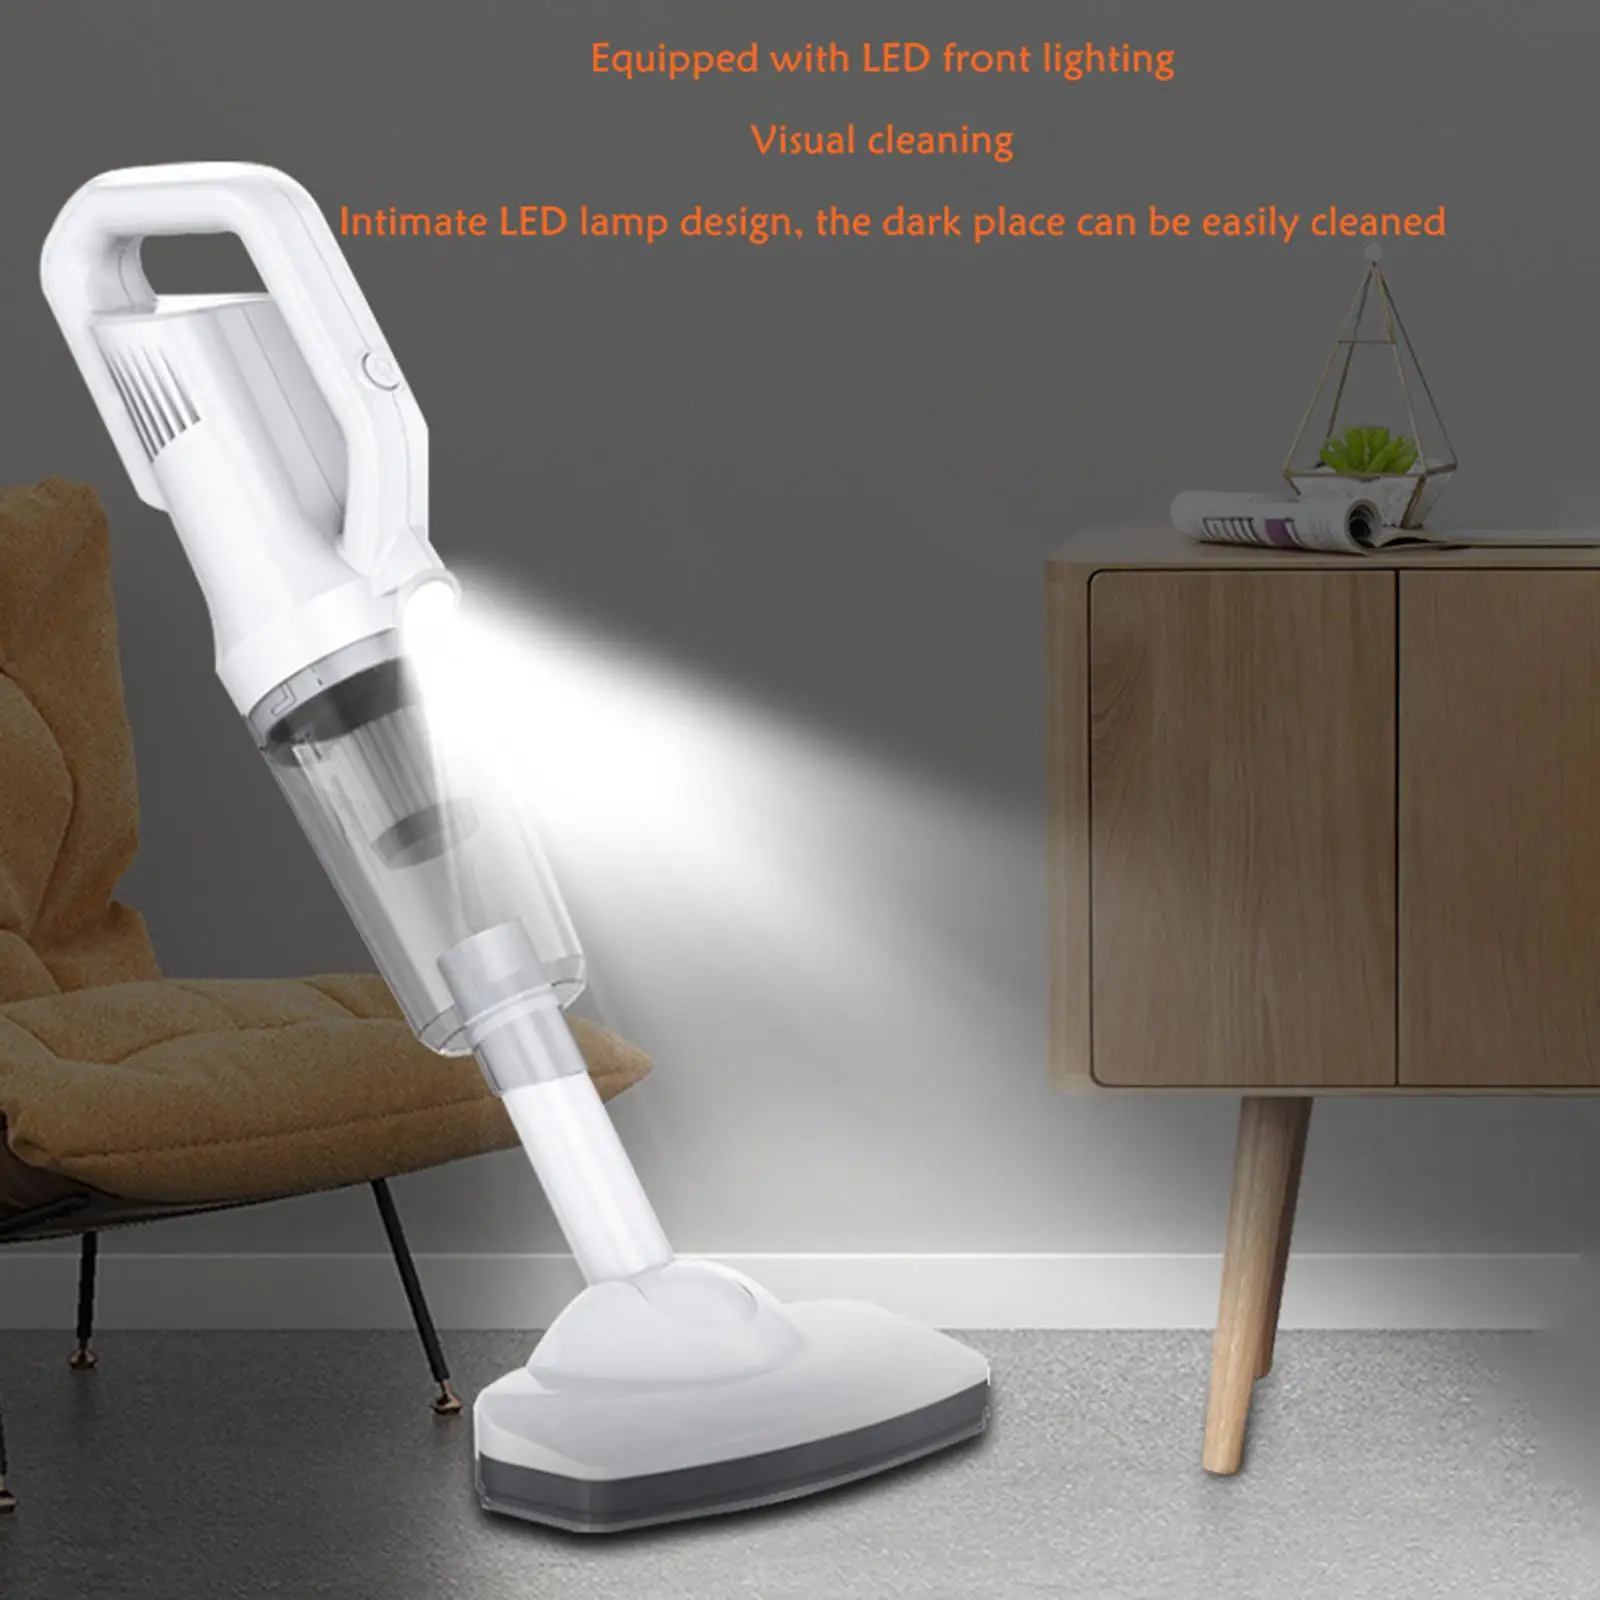 Handheld Vacuums Wet Dry Cleaning 12000PA Powerful Suction for Sofa Computer